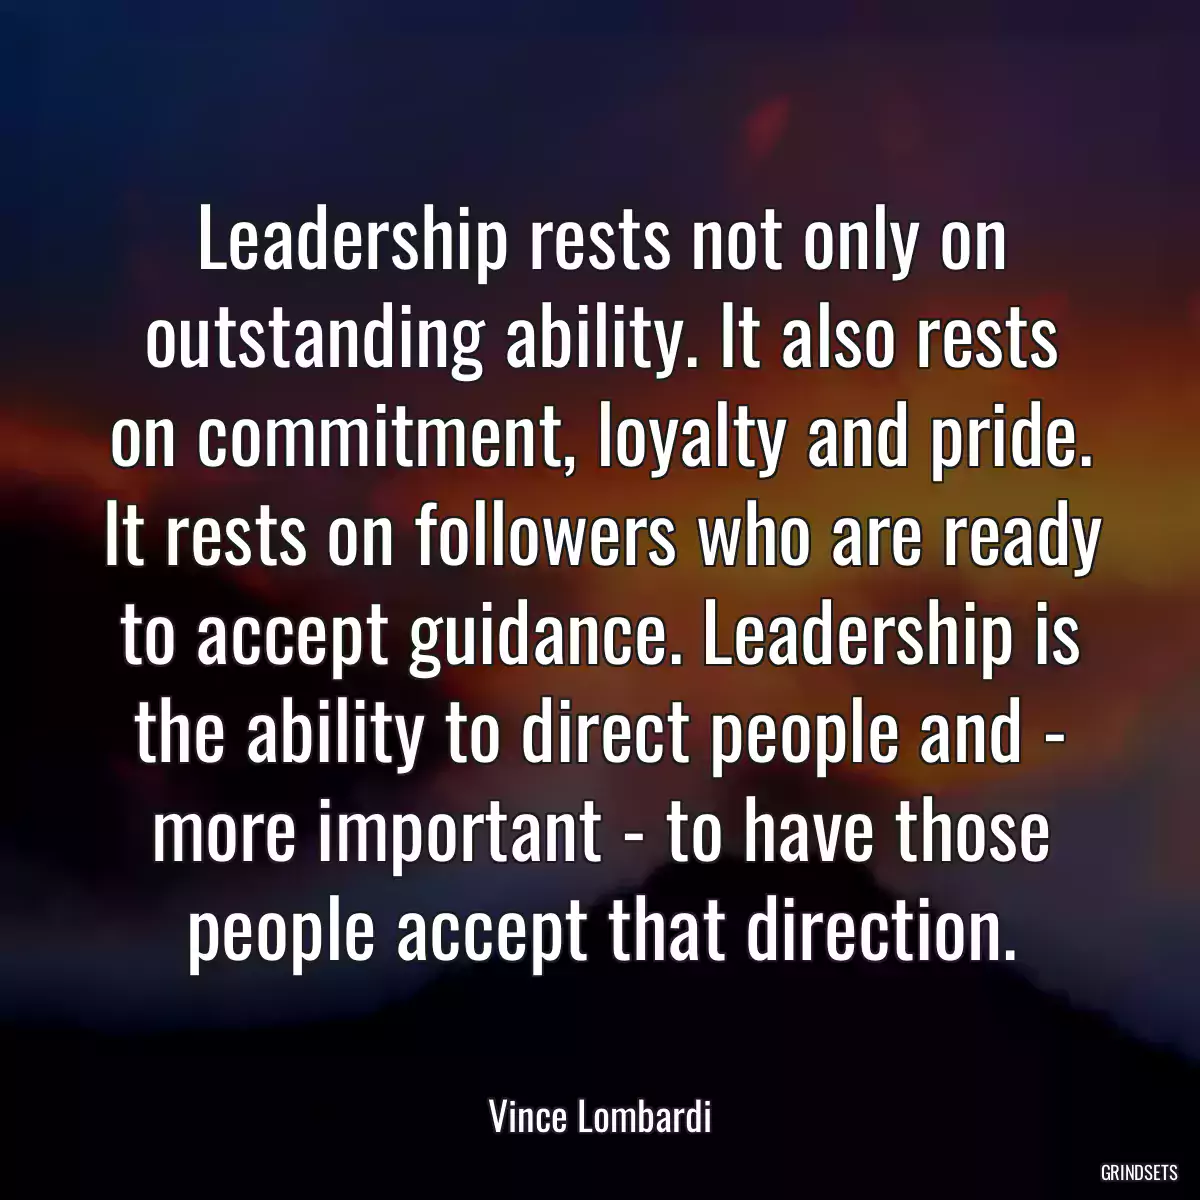 Leadership rests not only on outstanding ability. It also rests on commitment, loyalty and pride. It rests on followers who are ready to accept guidance. Leadership is the ability to direct people and - more important - to have those people accept that direction.